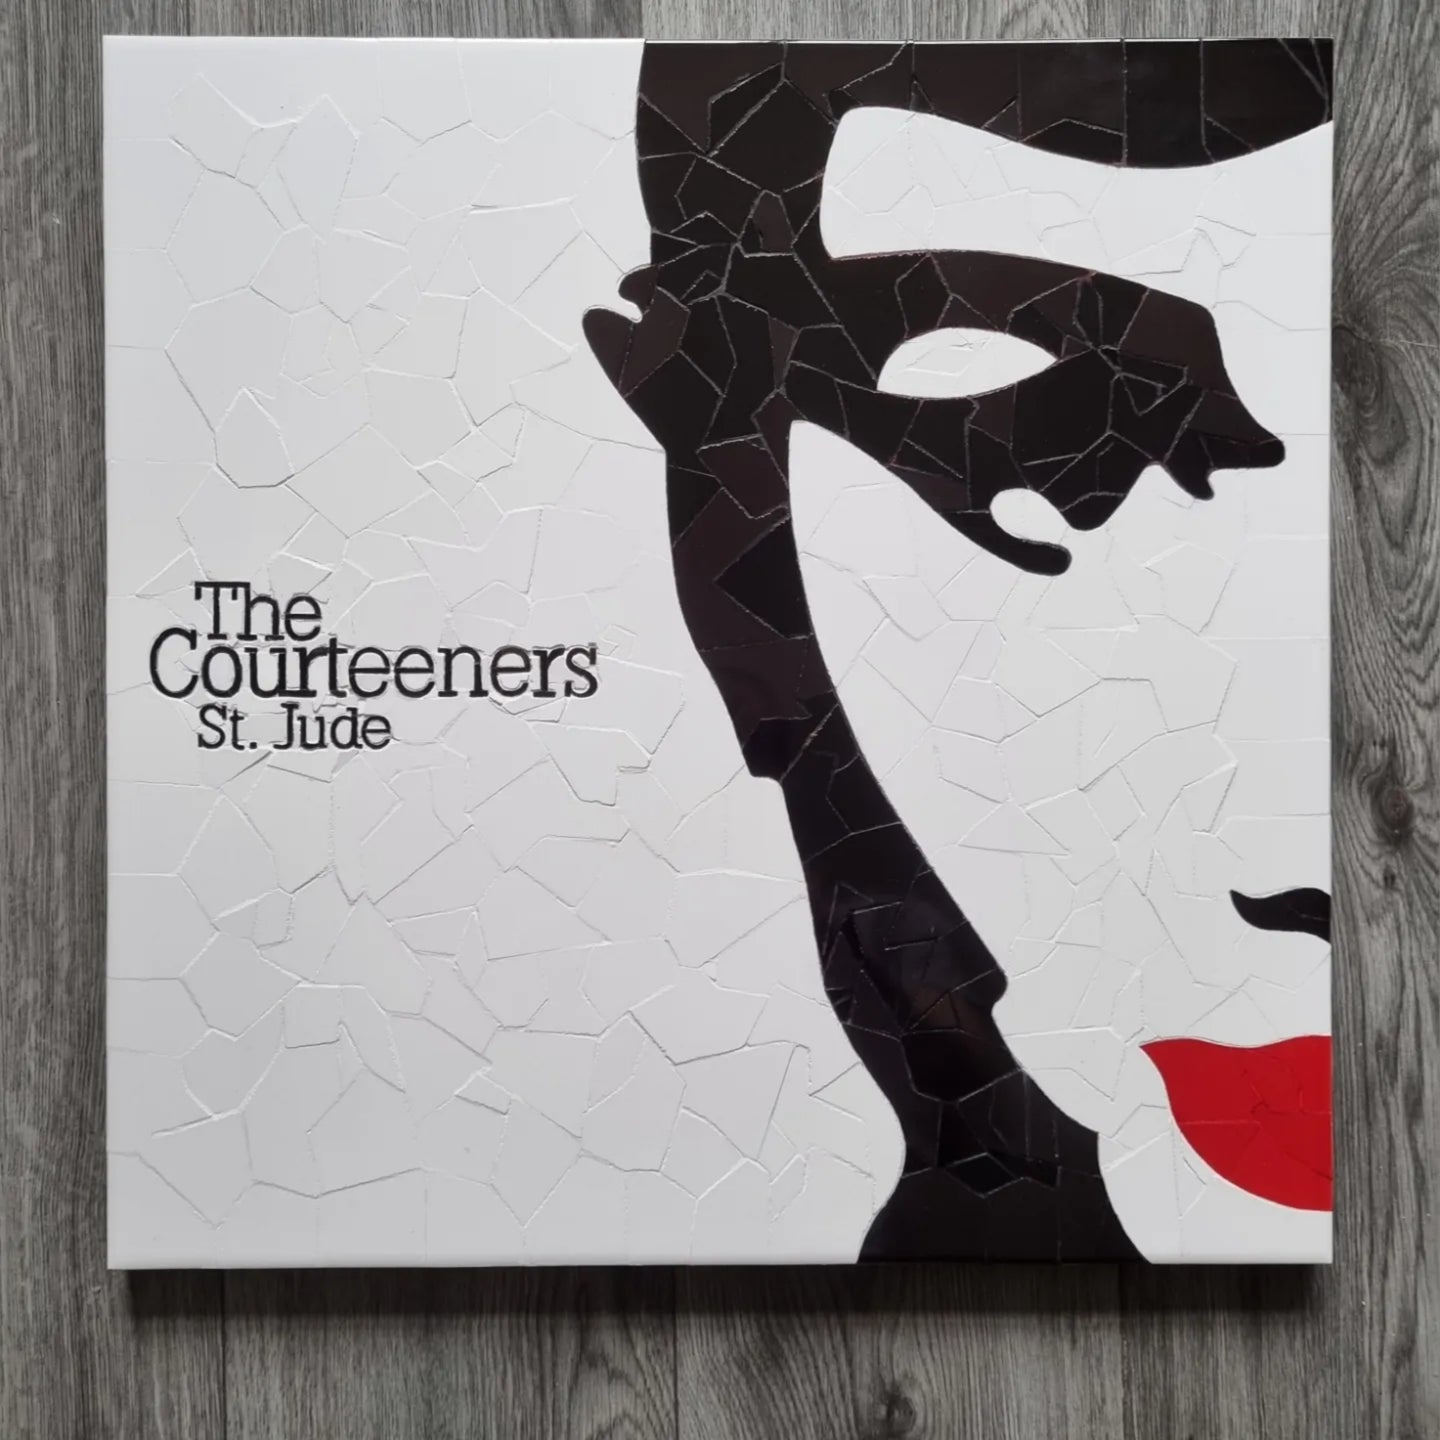 The Courteeners St. Jude